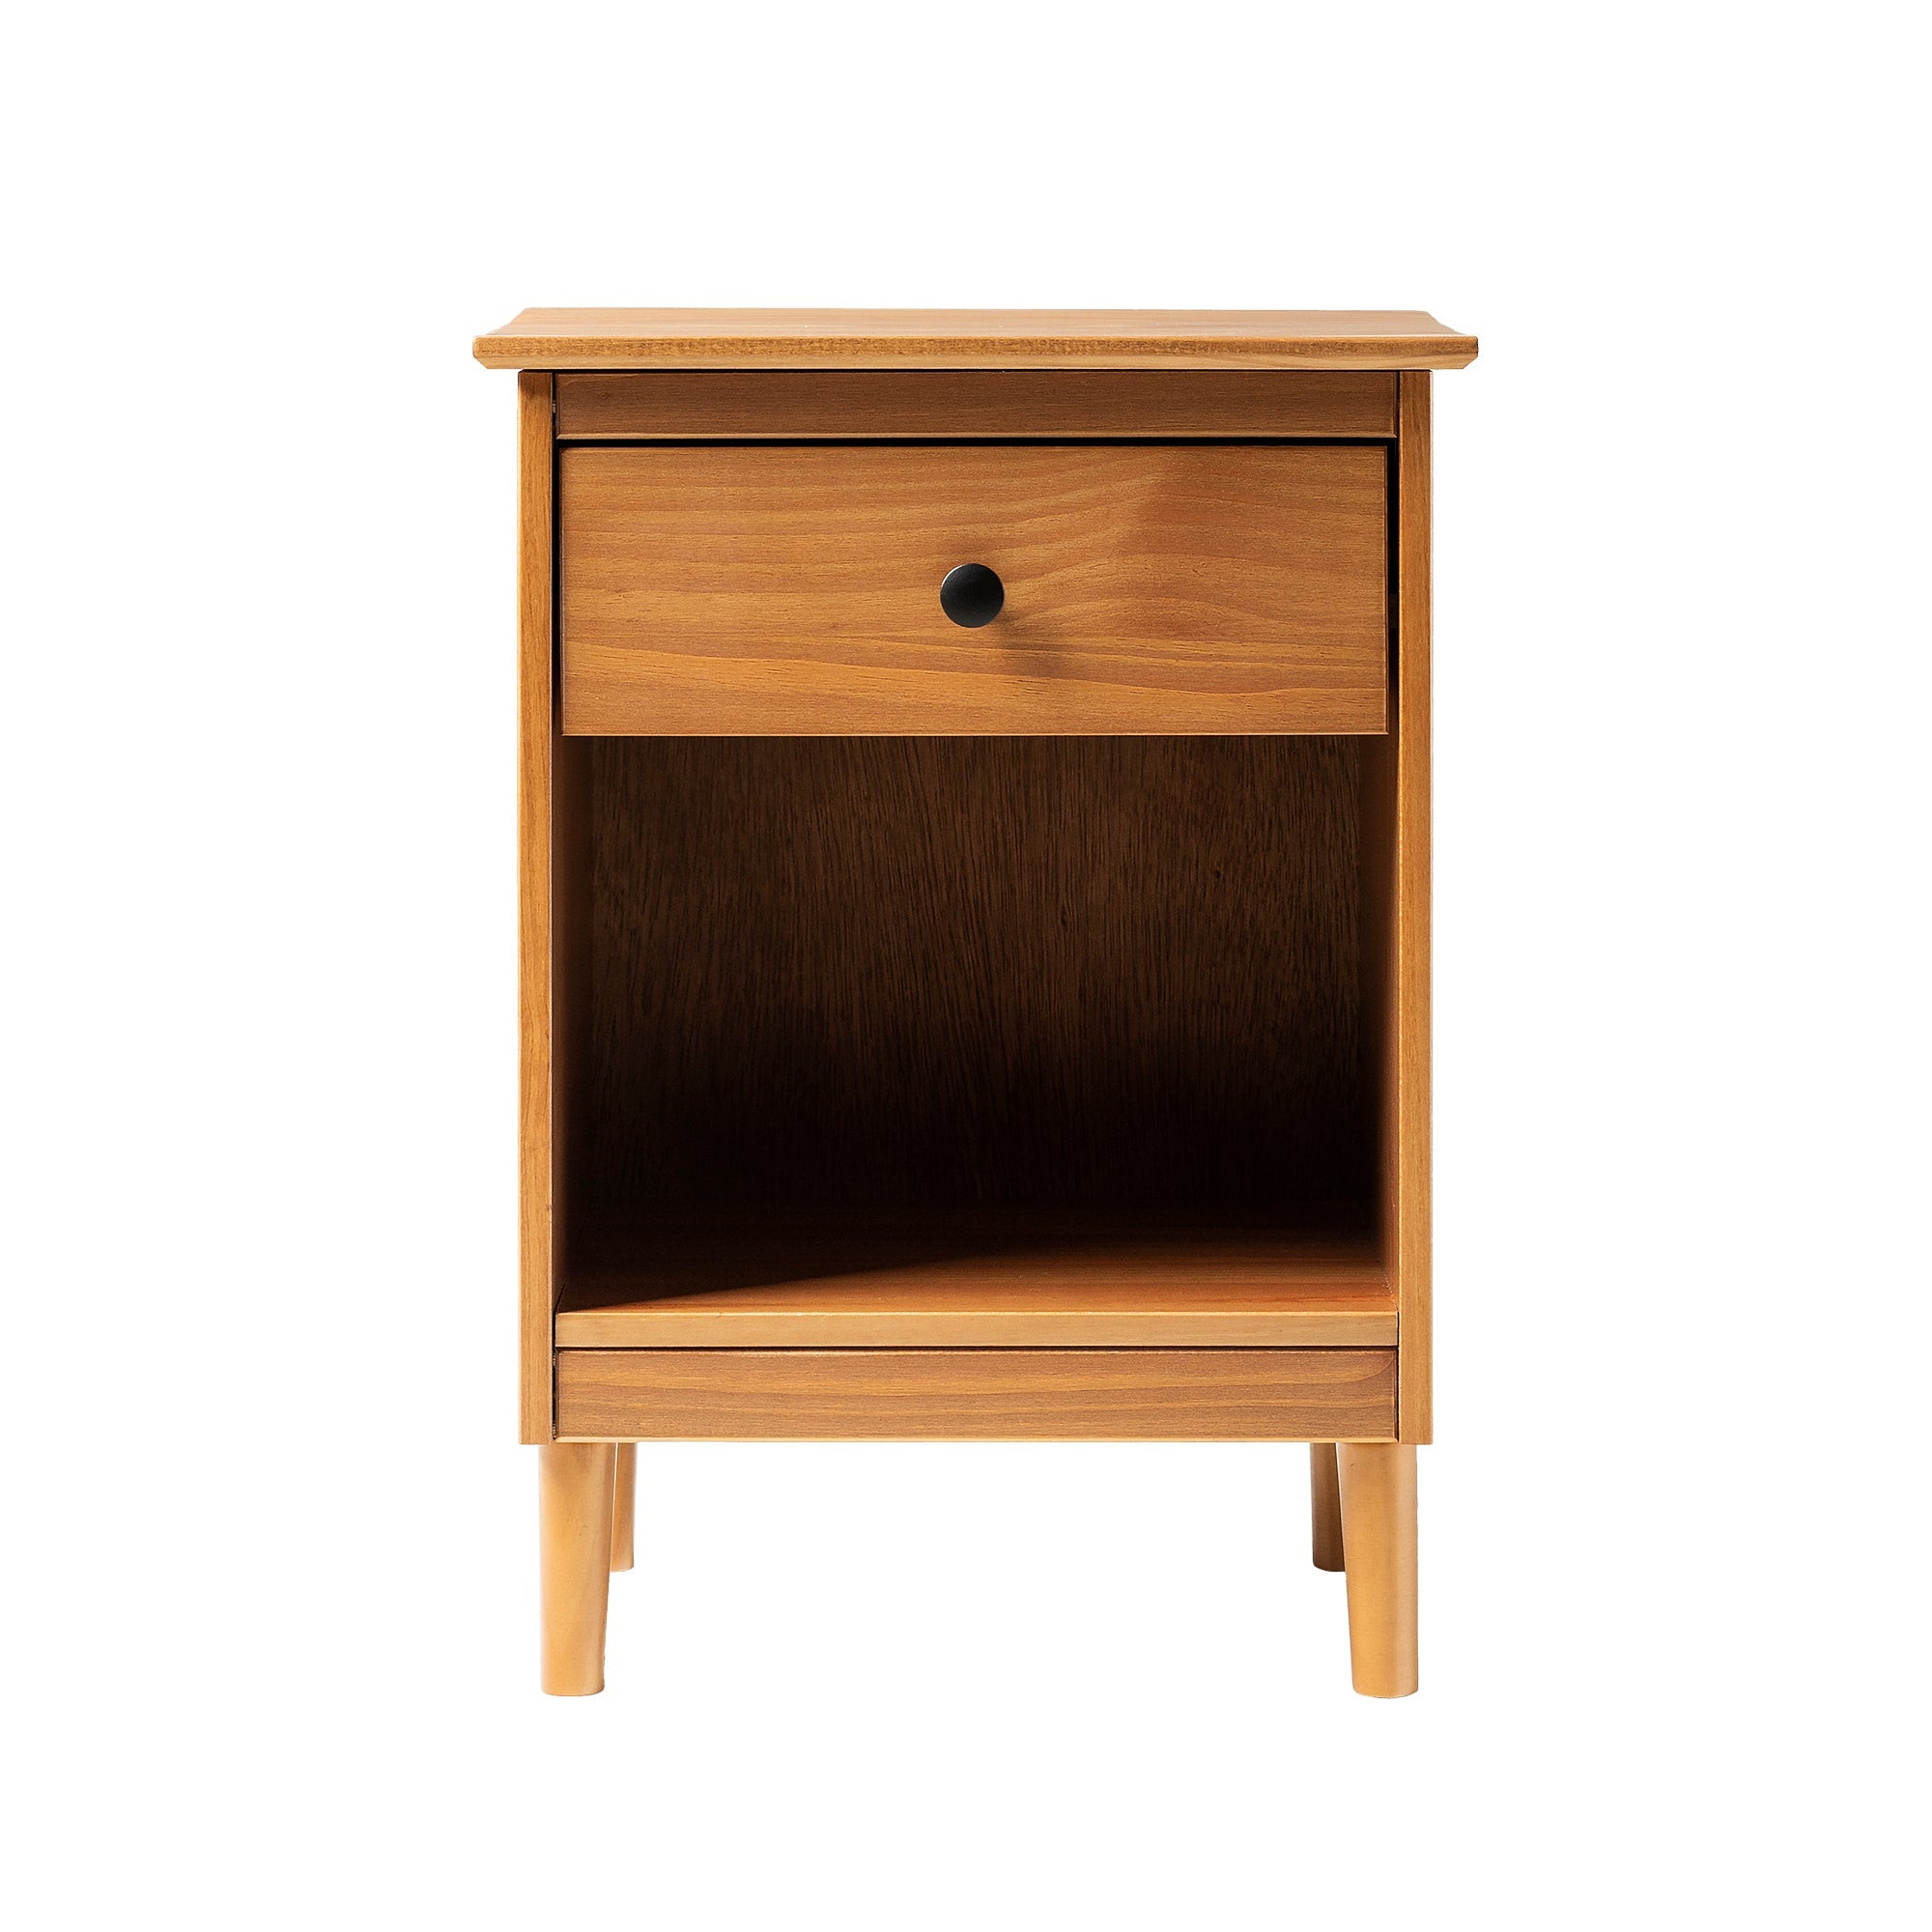 1-Drawer Solid Wood Nightstand with Cubby - Nightstands